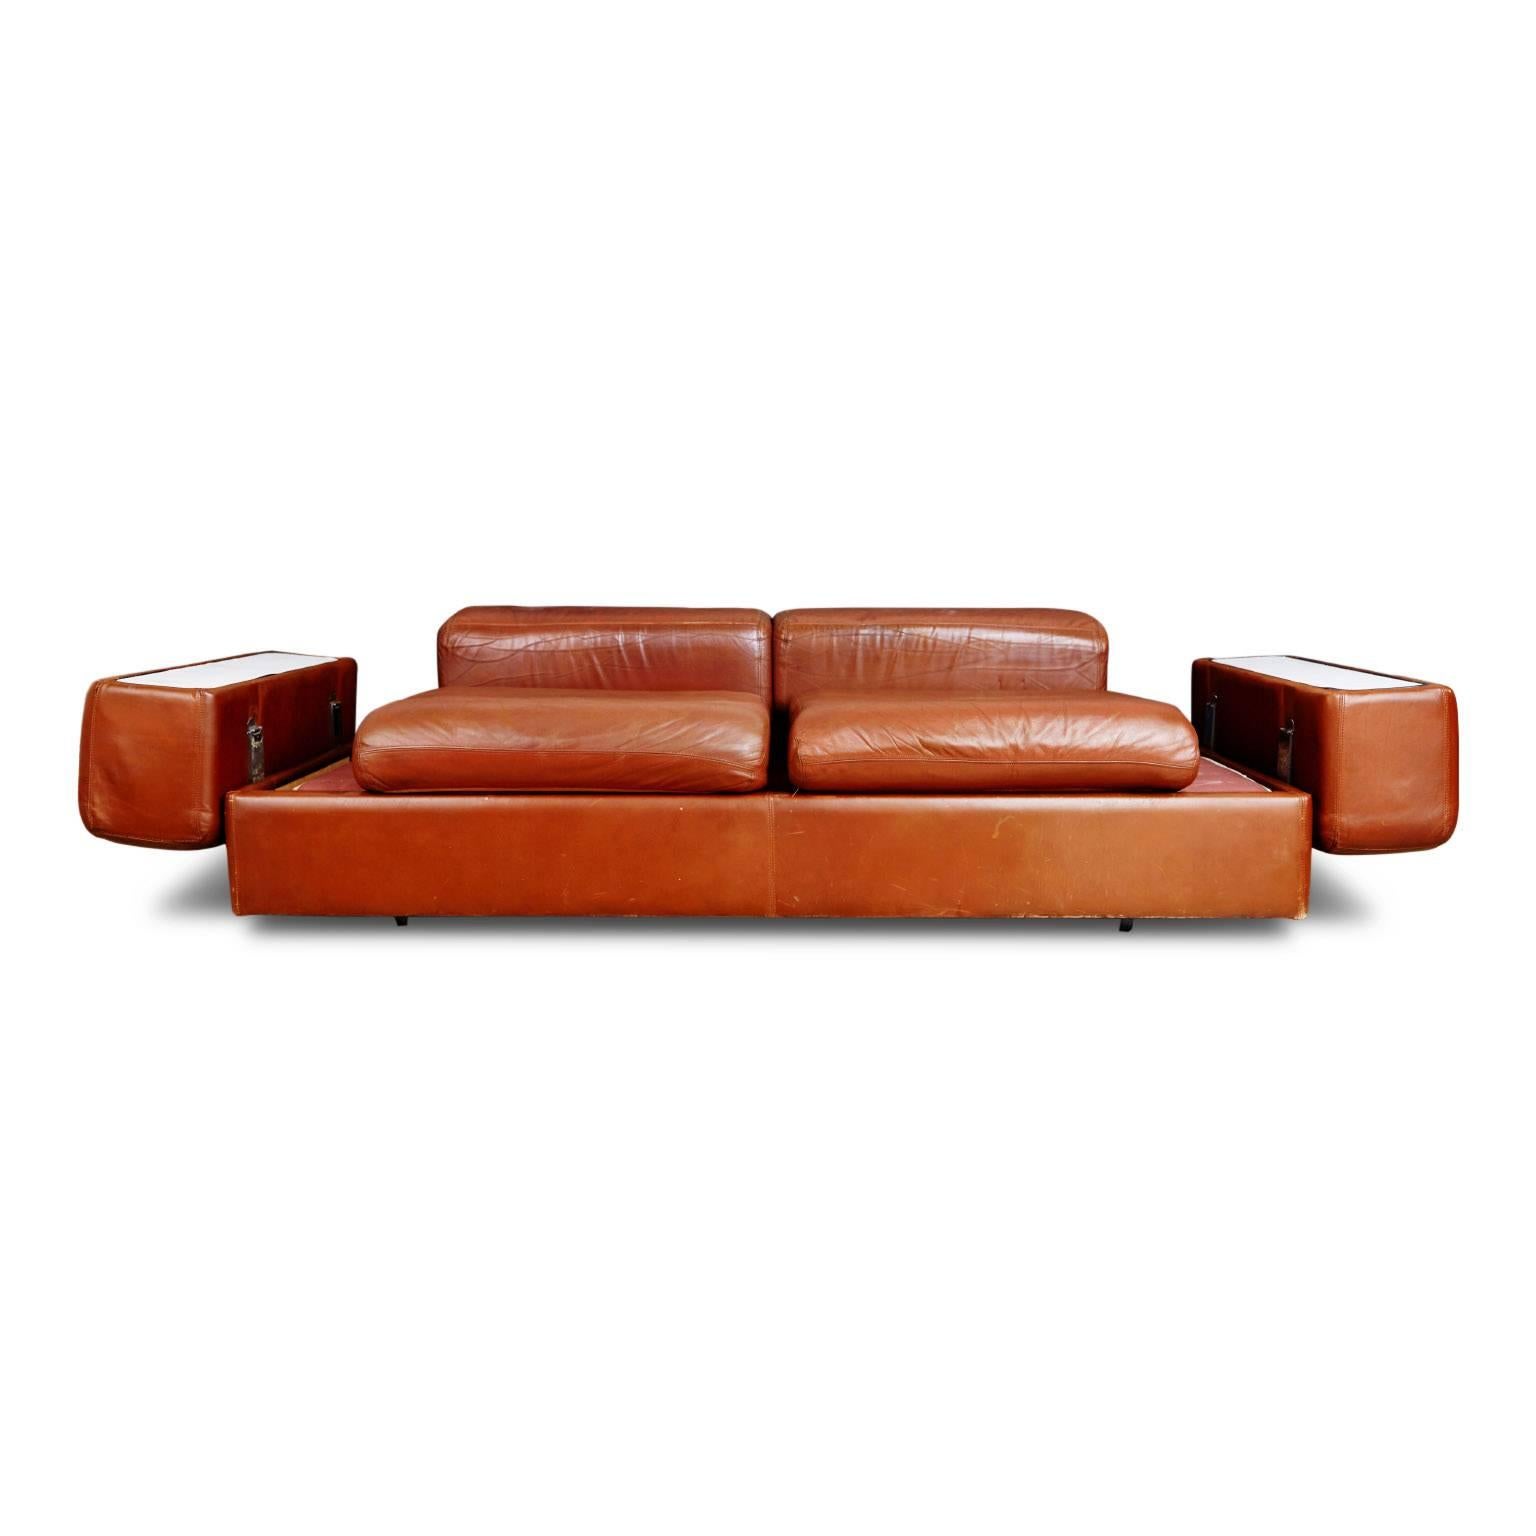 Mid-Century Modern Tito Agnoli Leather Sofa and Convertible Bed for Stendig, Italy